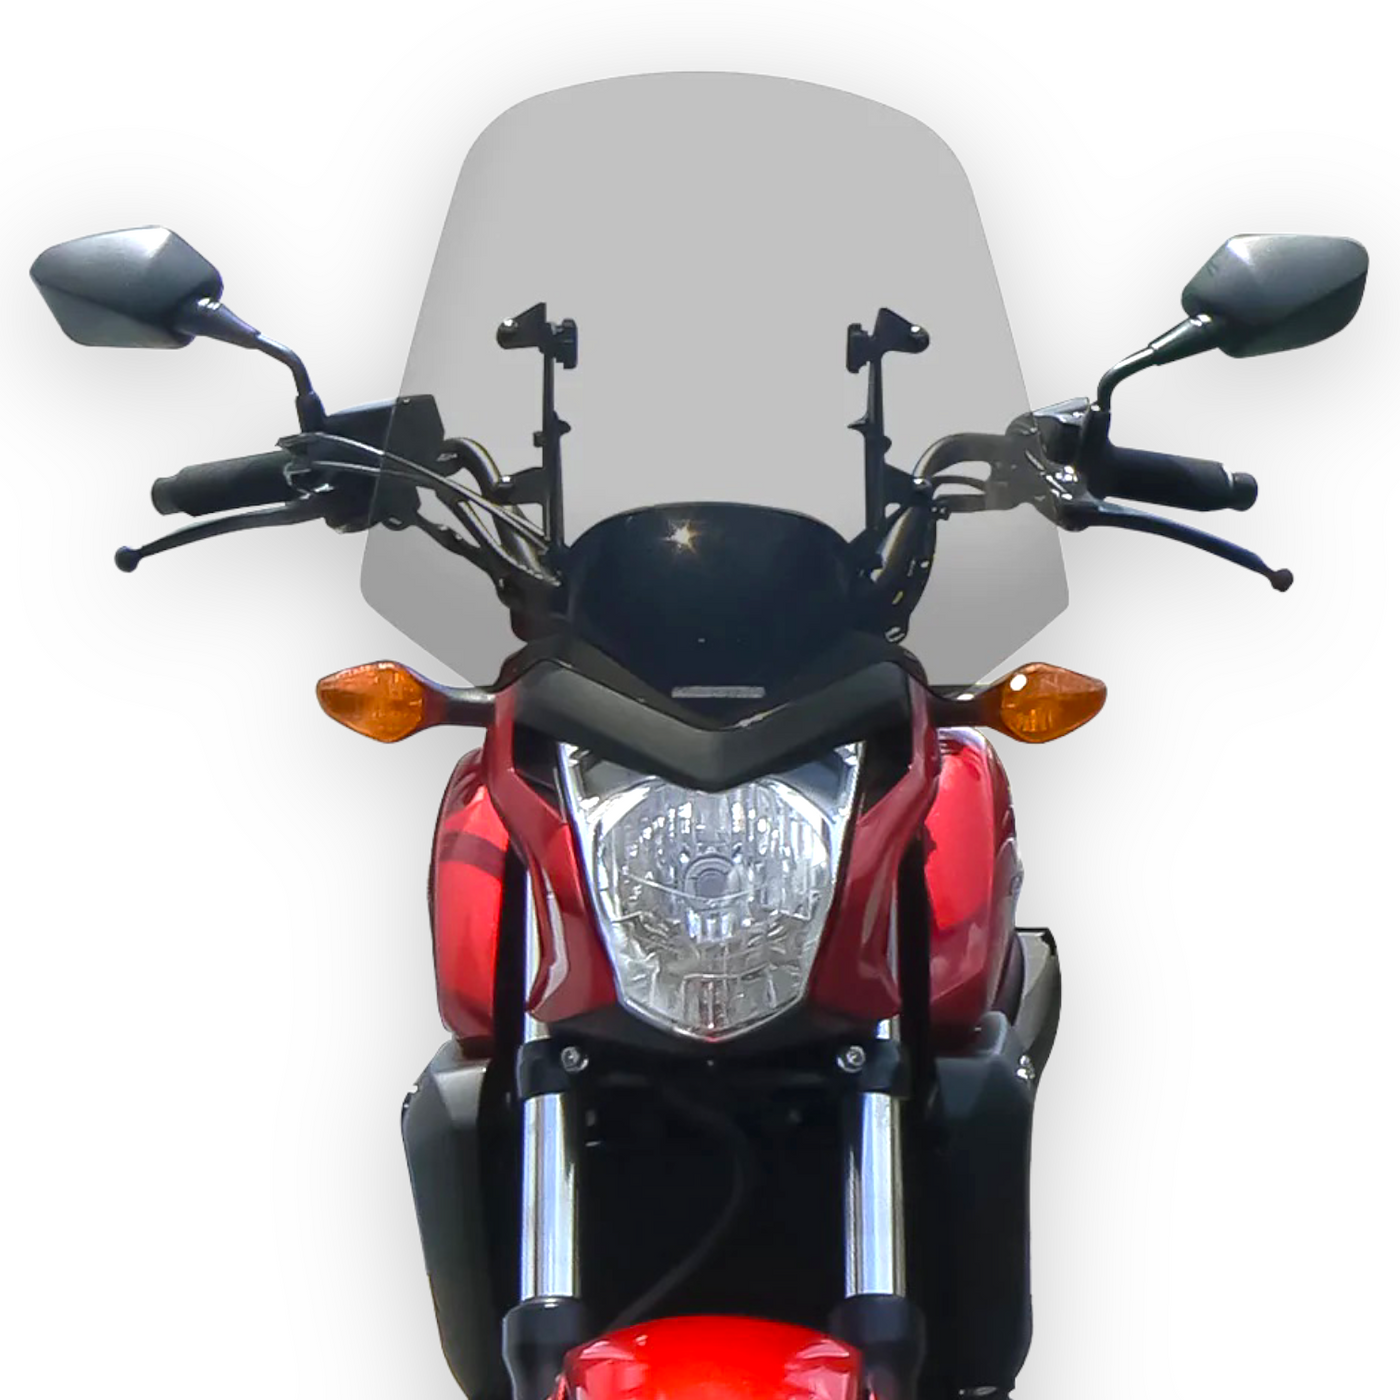 Adjustable Windshield System for Honda CTX700N & NC700S (2012 & Up)